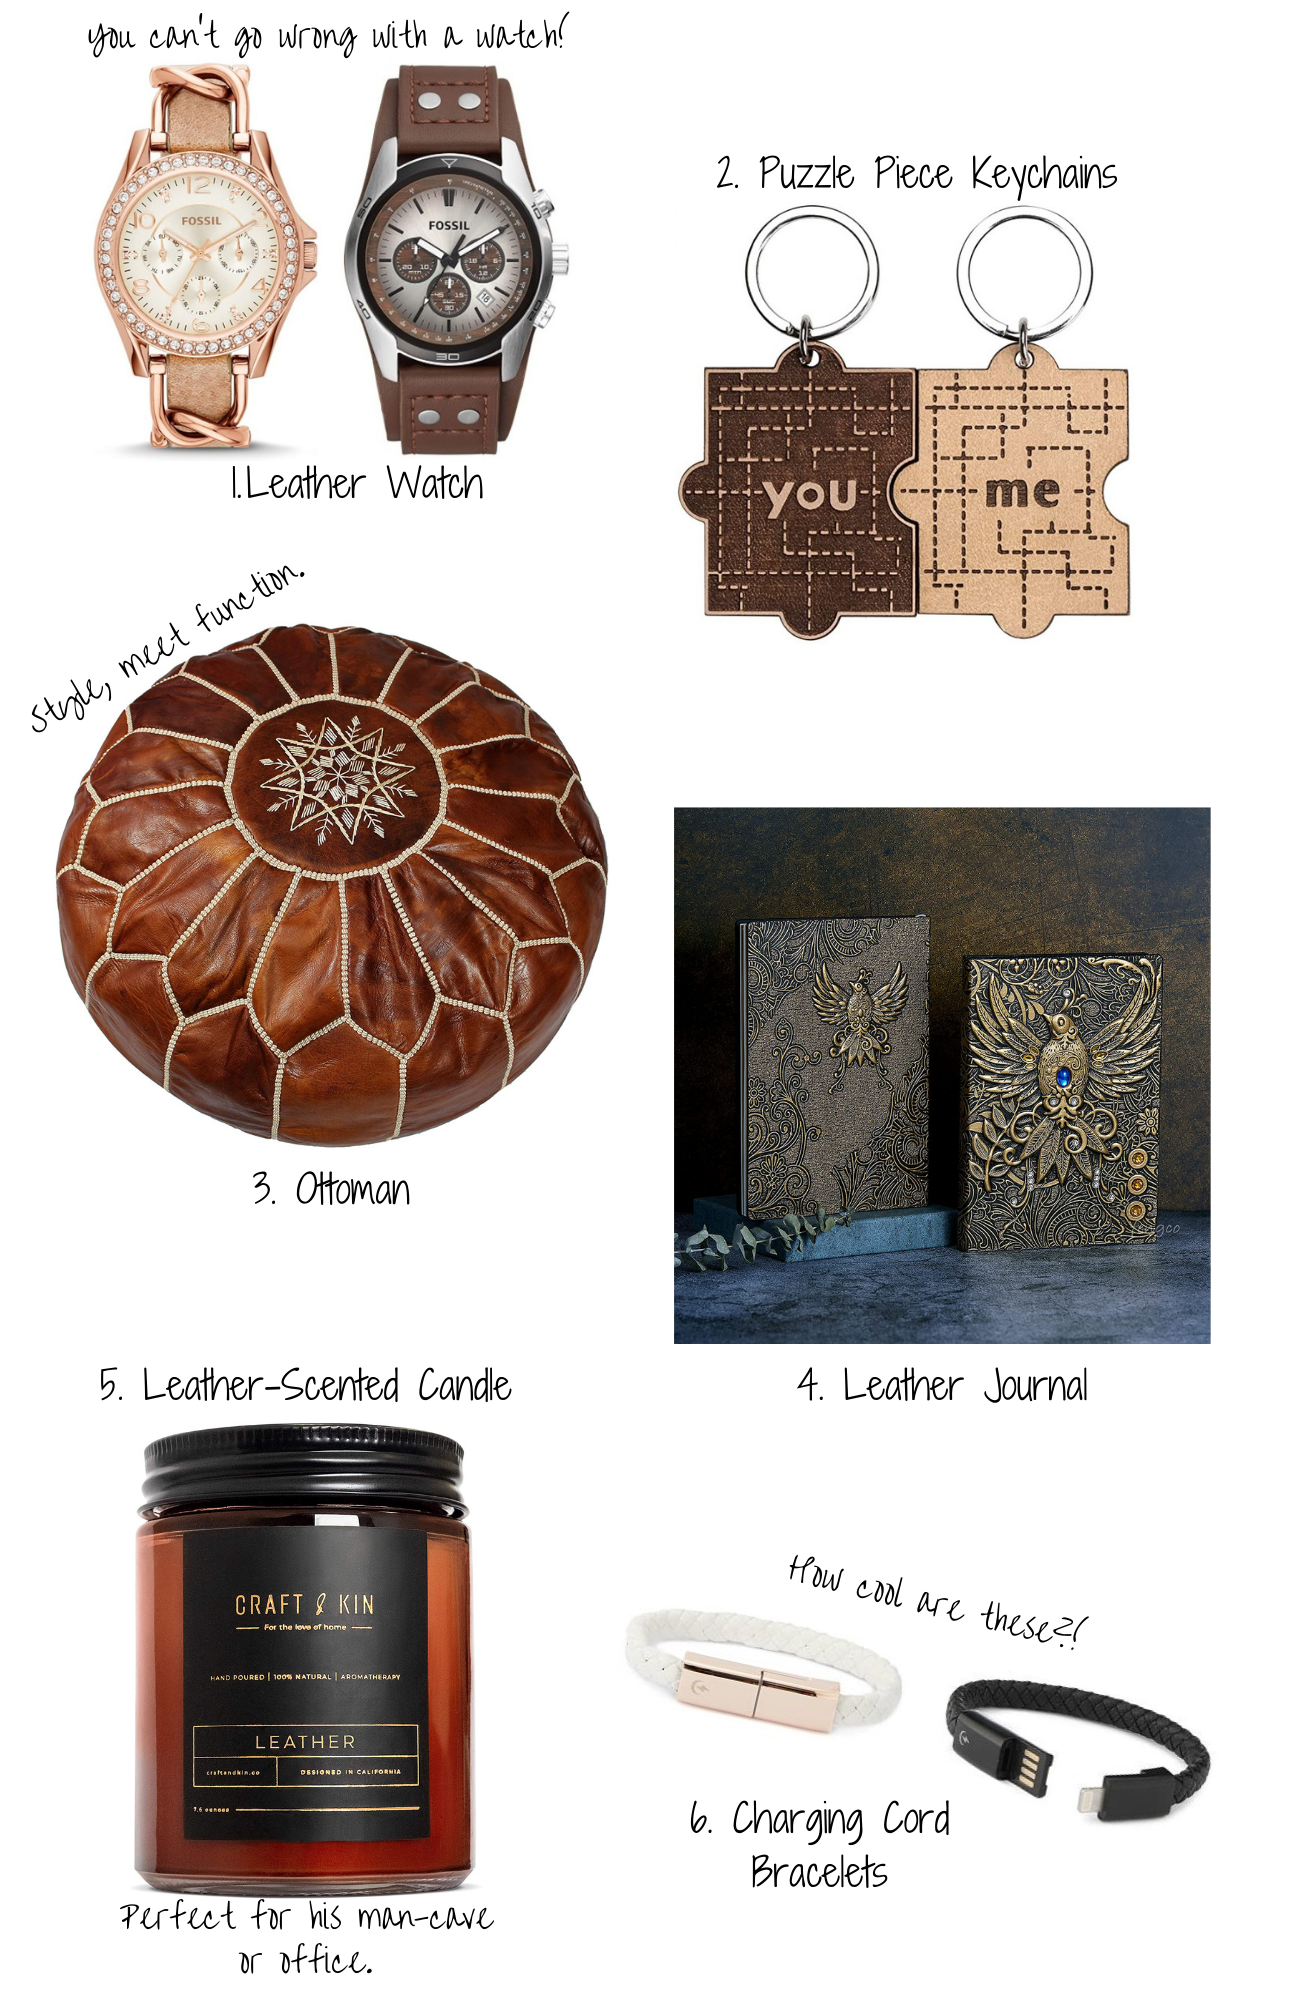 9th-wedding-anniversary-leather-gift-ideas